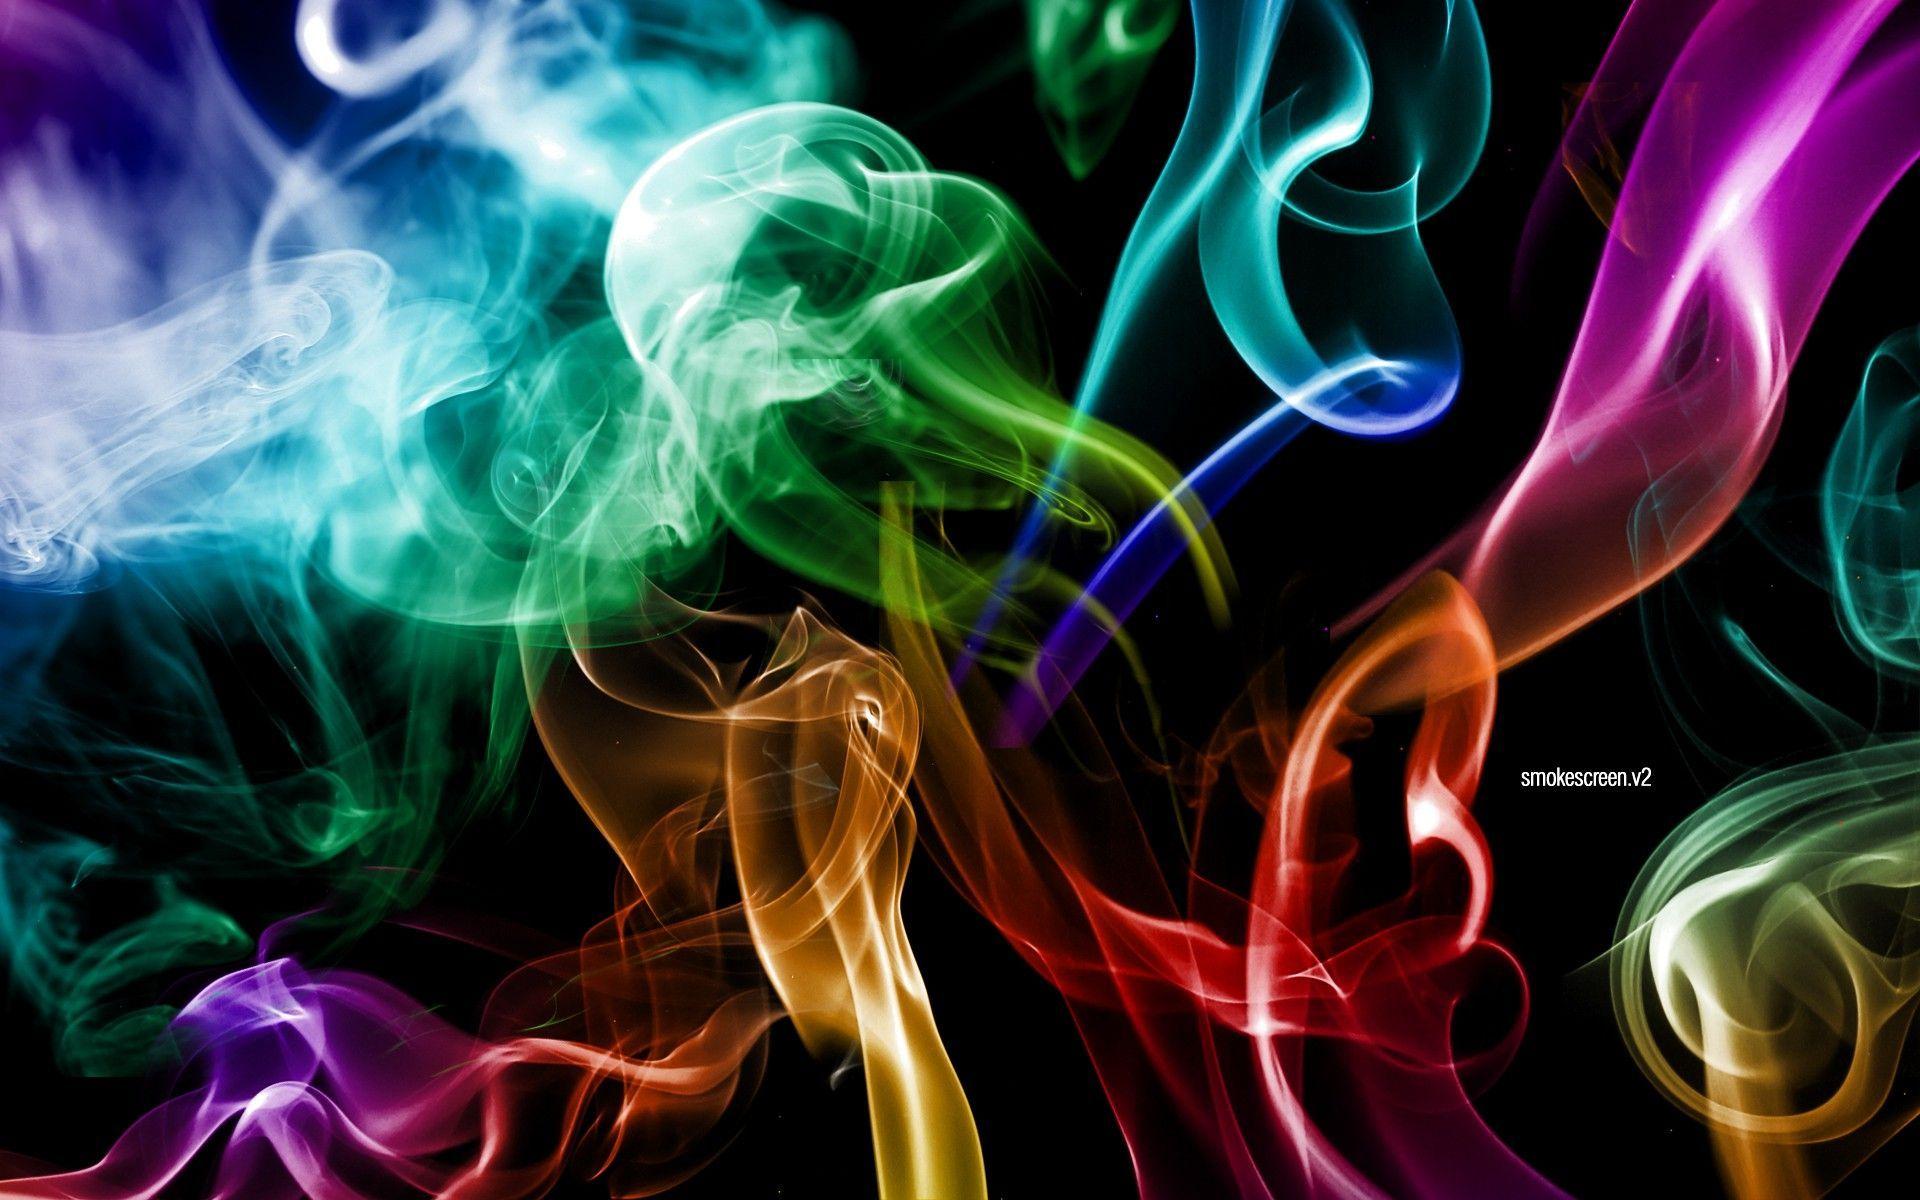 image For > Cool Colorful Smoke Background